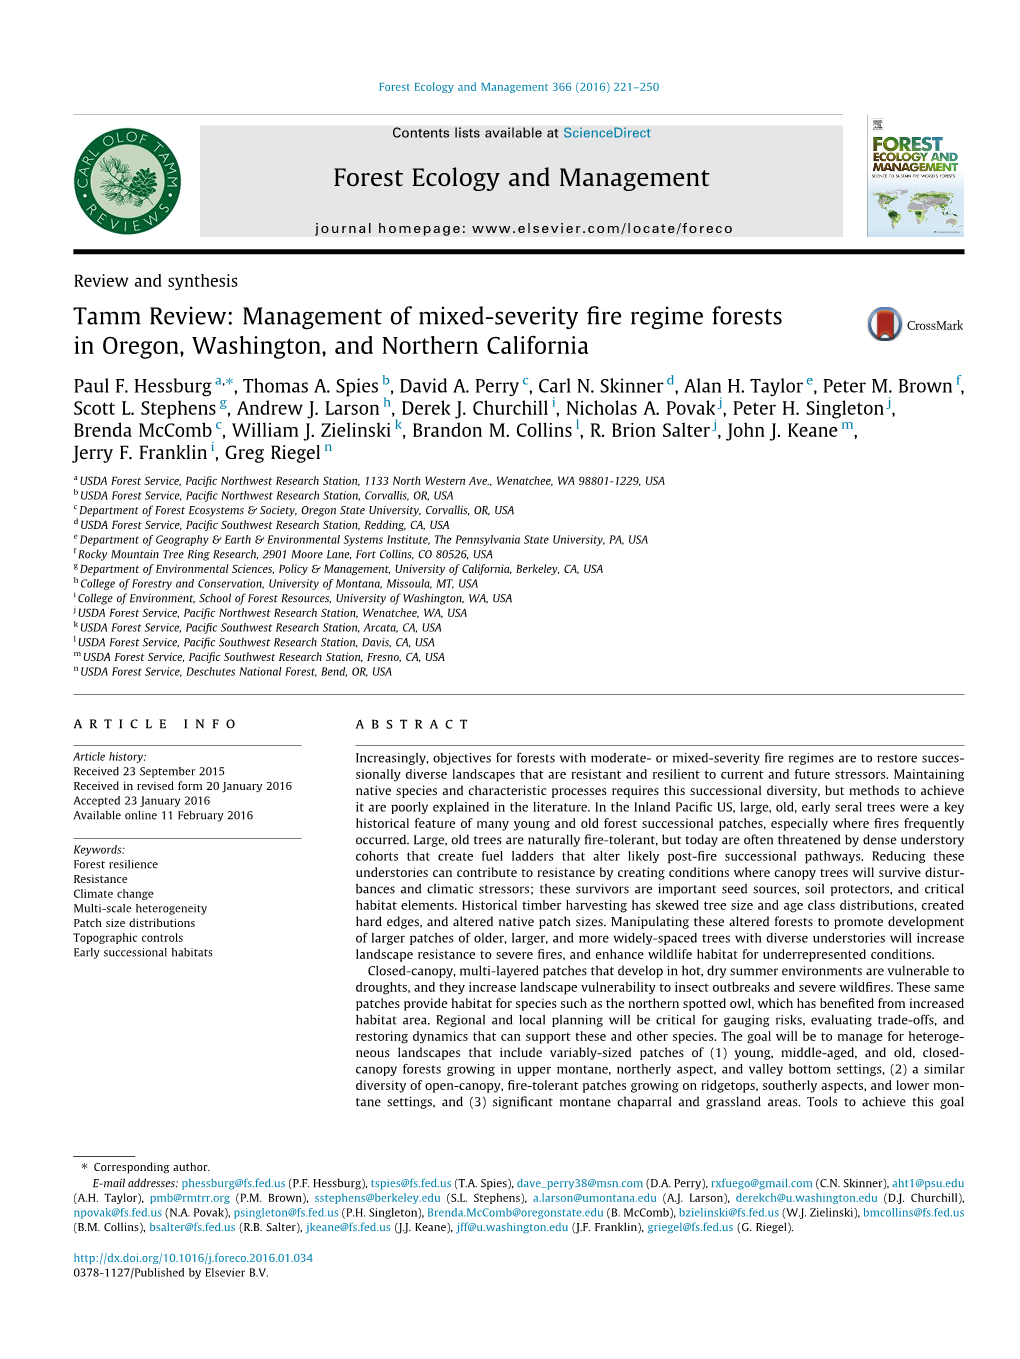 Tamm Review: Management of Mixed-Severity Fire Regime Forests in Oregon, Washington, and Northern California